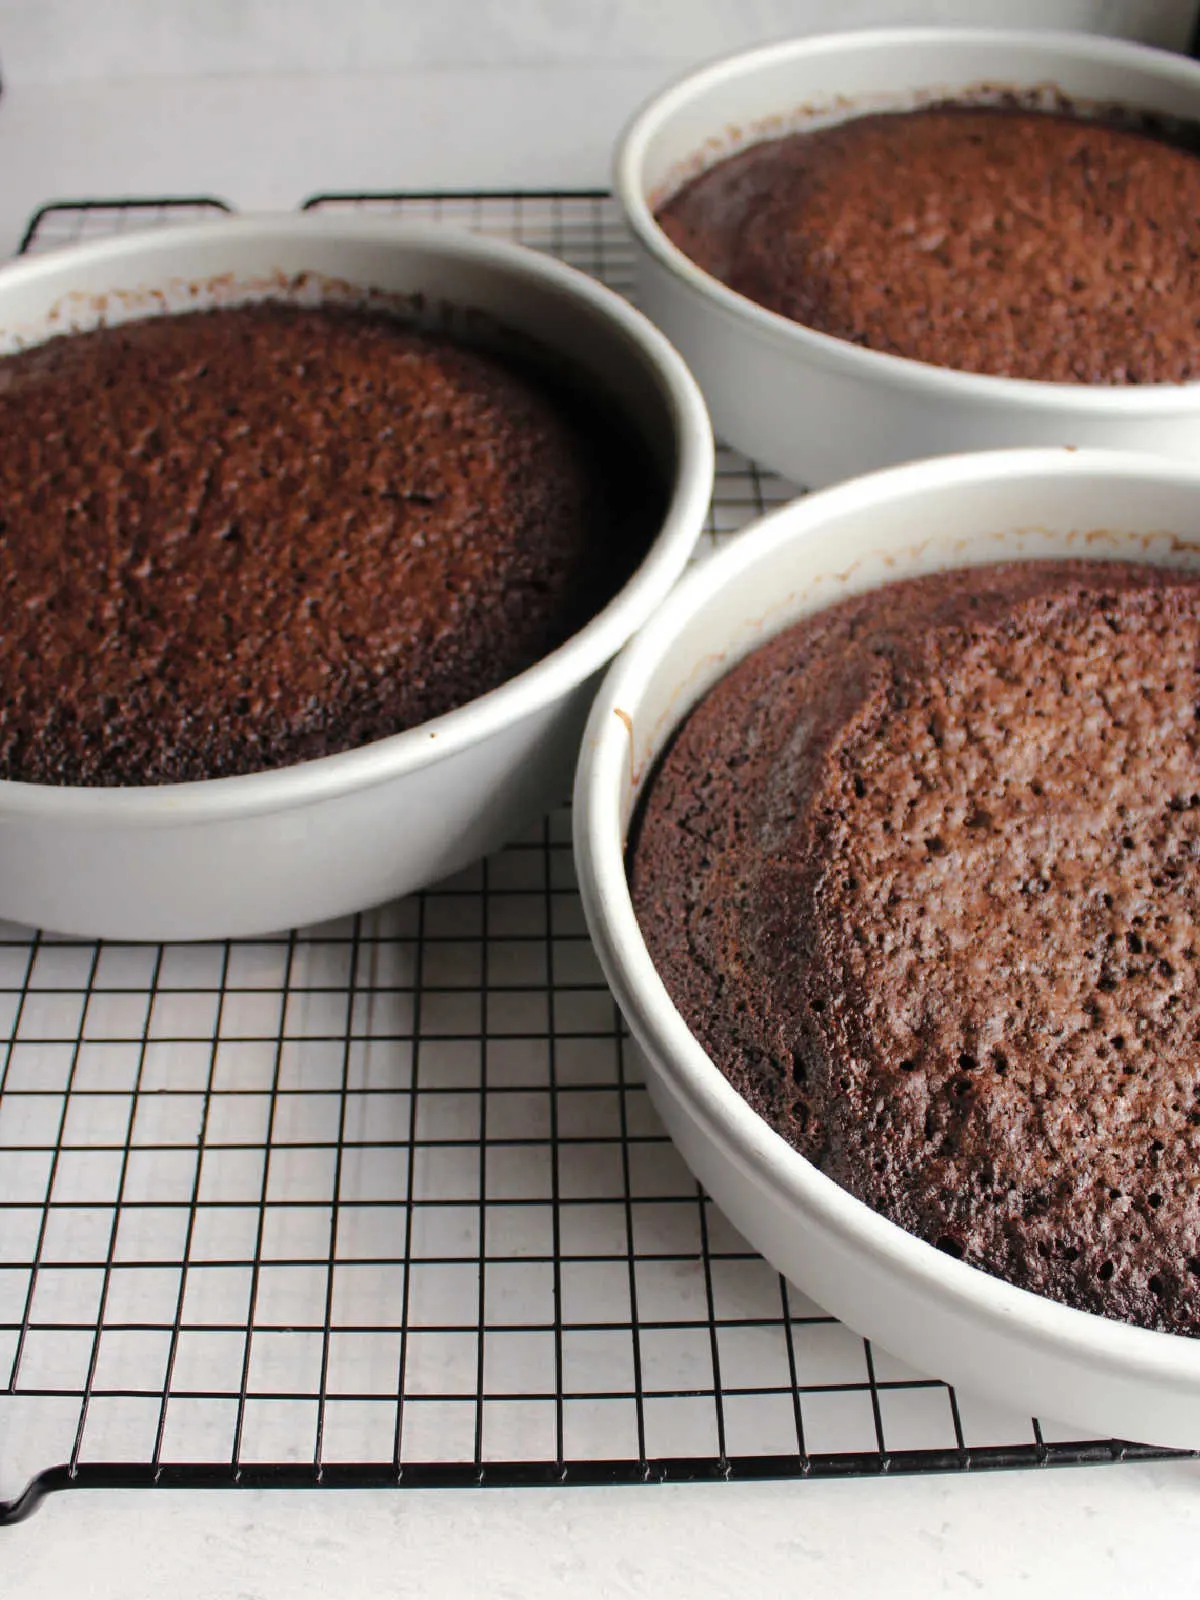 Three 10 inch round chocolate cakes fresh from the oven, cooling on wire rack.